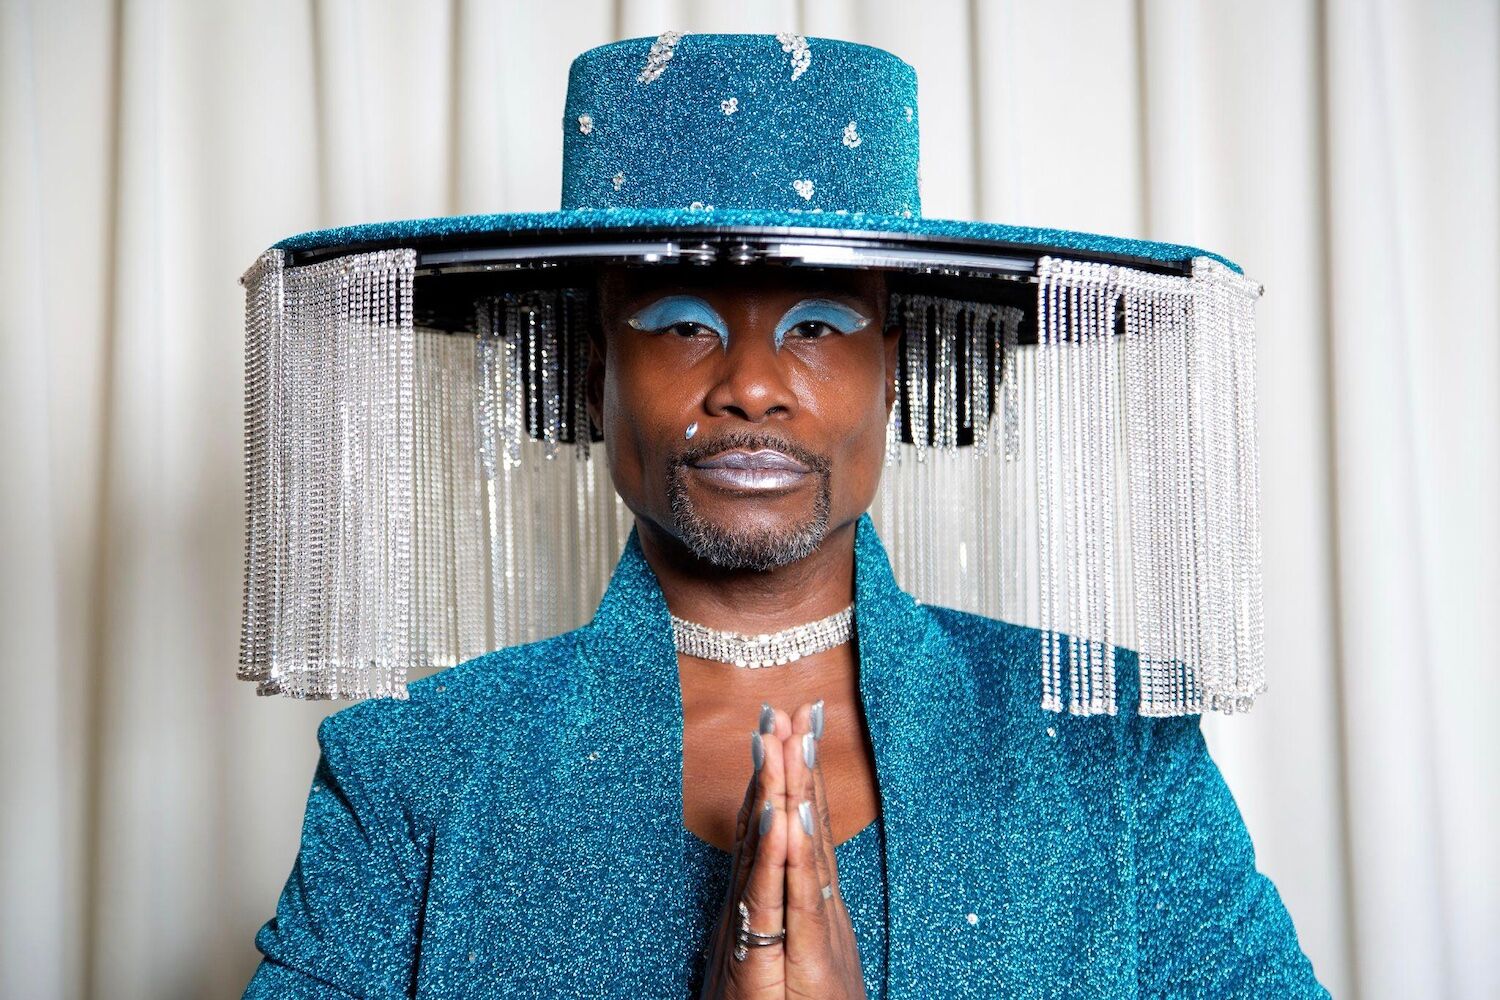 Billy Porter in a Sam Ratelle creation before the 2020 Grammy Awards in Los Angeles. Billy is wearing BAJA EAST and a custom hat by Sarah Sokol Millinery. Photo by Santiago Felipe/Getty Images.